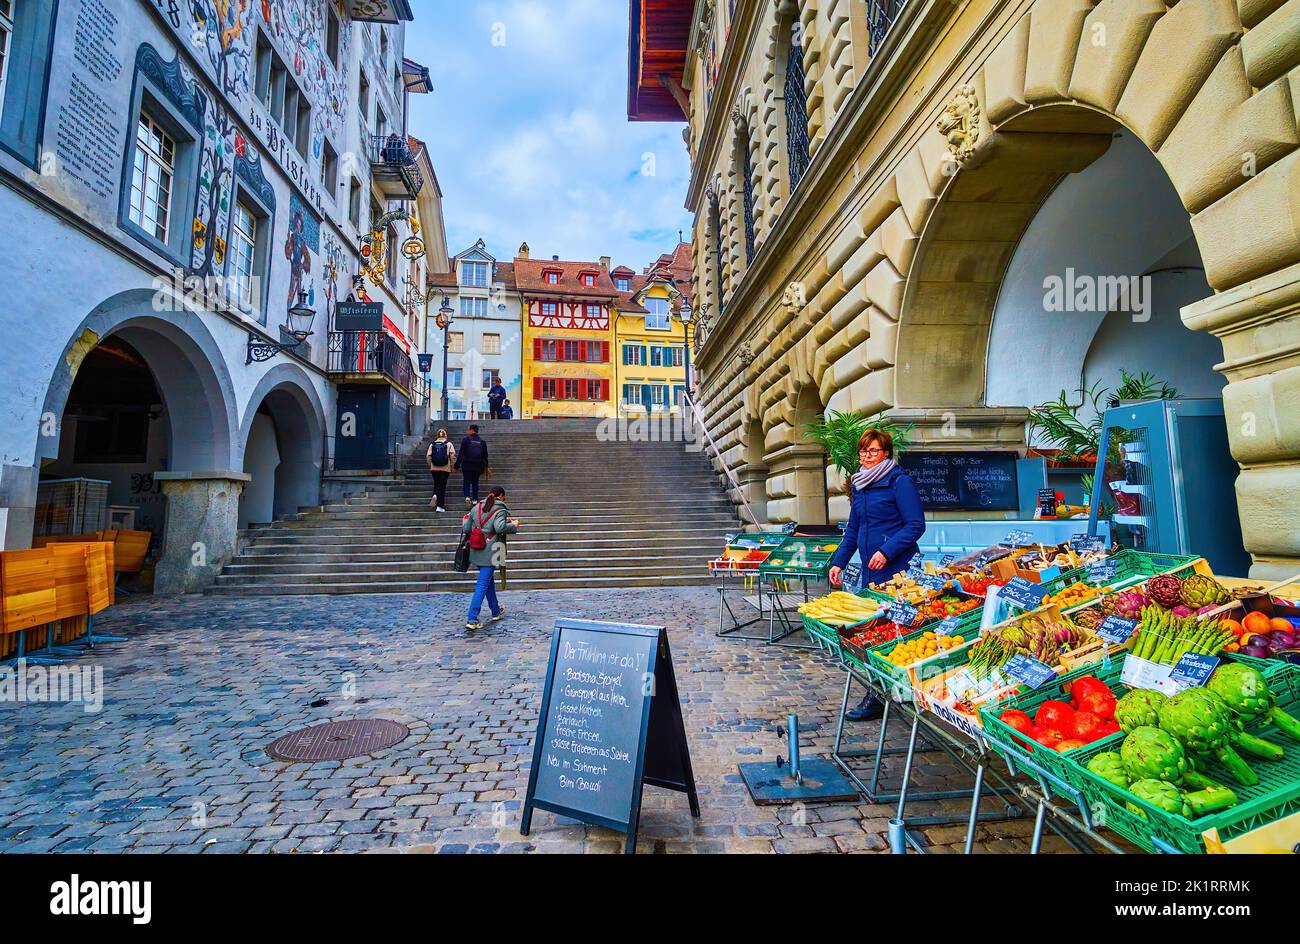 LUCERNE, SWITZERLAND - MARCH 30, 2022: The vegetable market stall in the arcade of medieval house on Unter der Egg embankment, on March 30 in Lucerne, Stock Photo